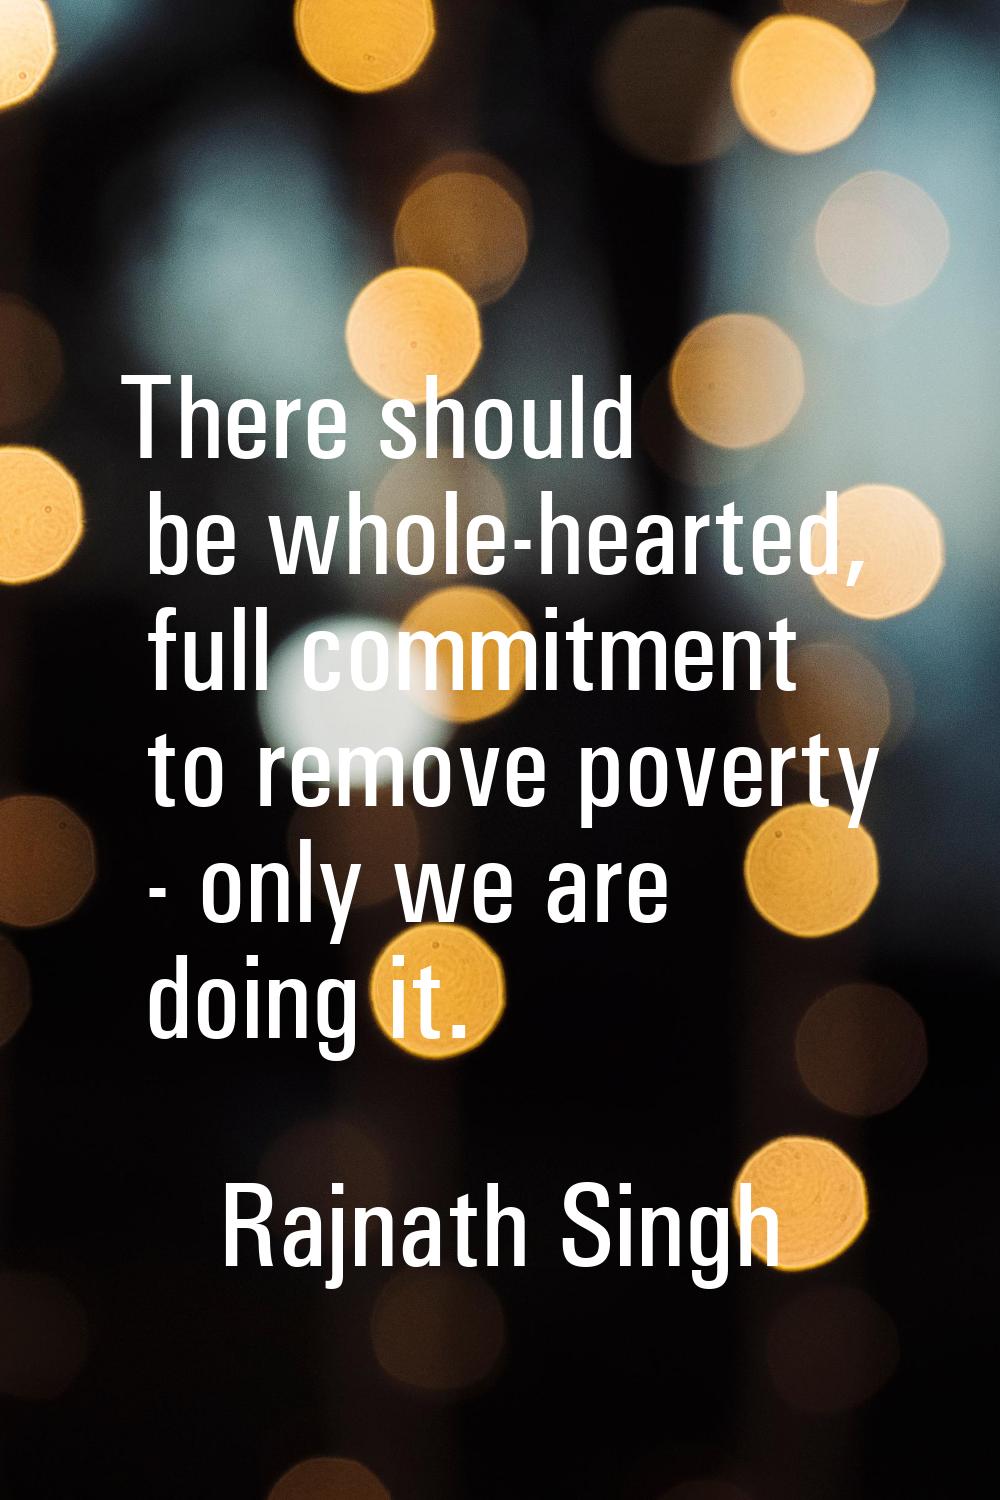 There should be whole-hearted, full commitment to remove poverty - only we are doing it.